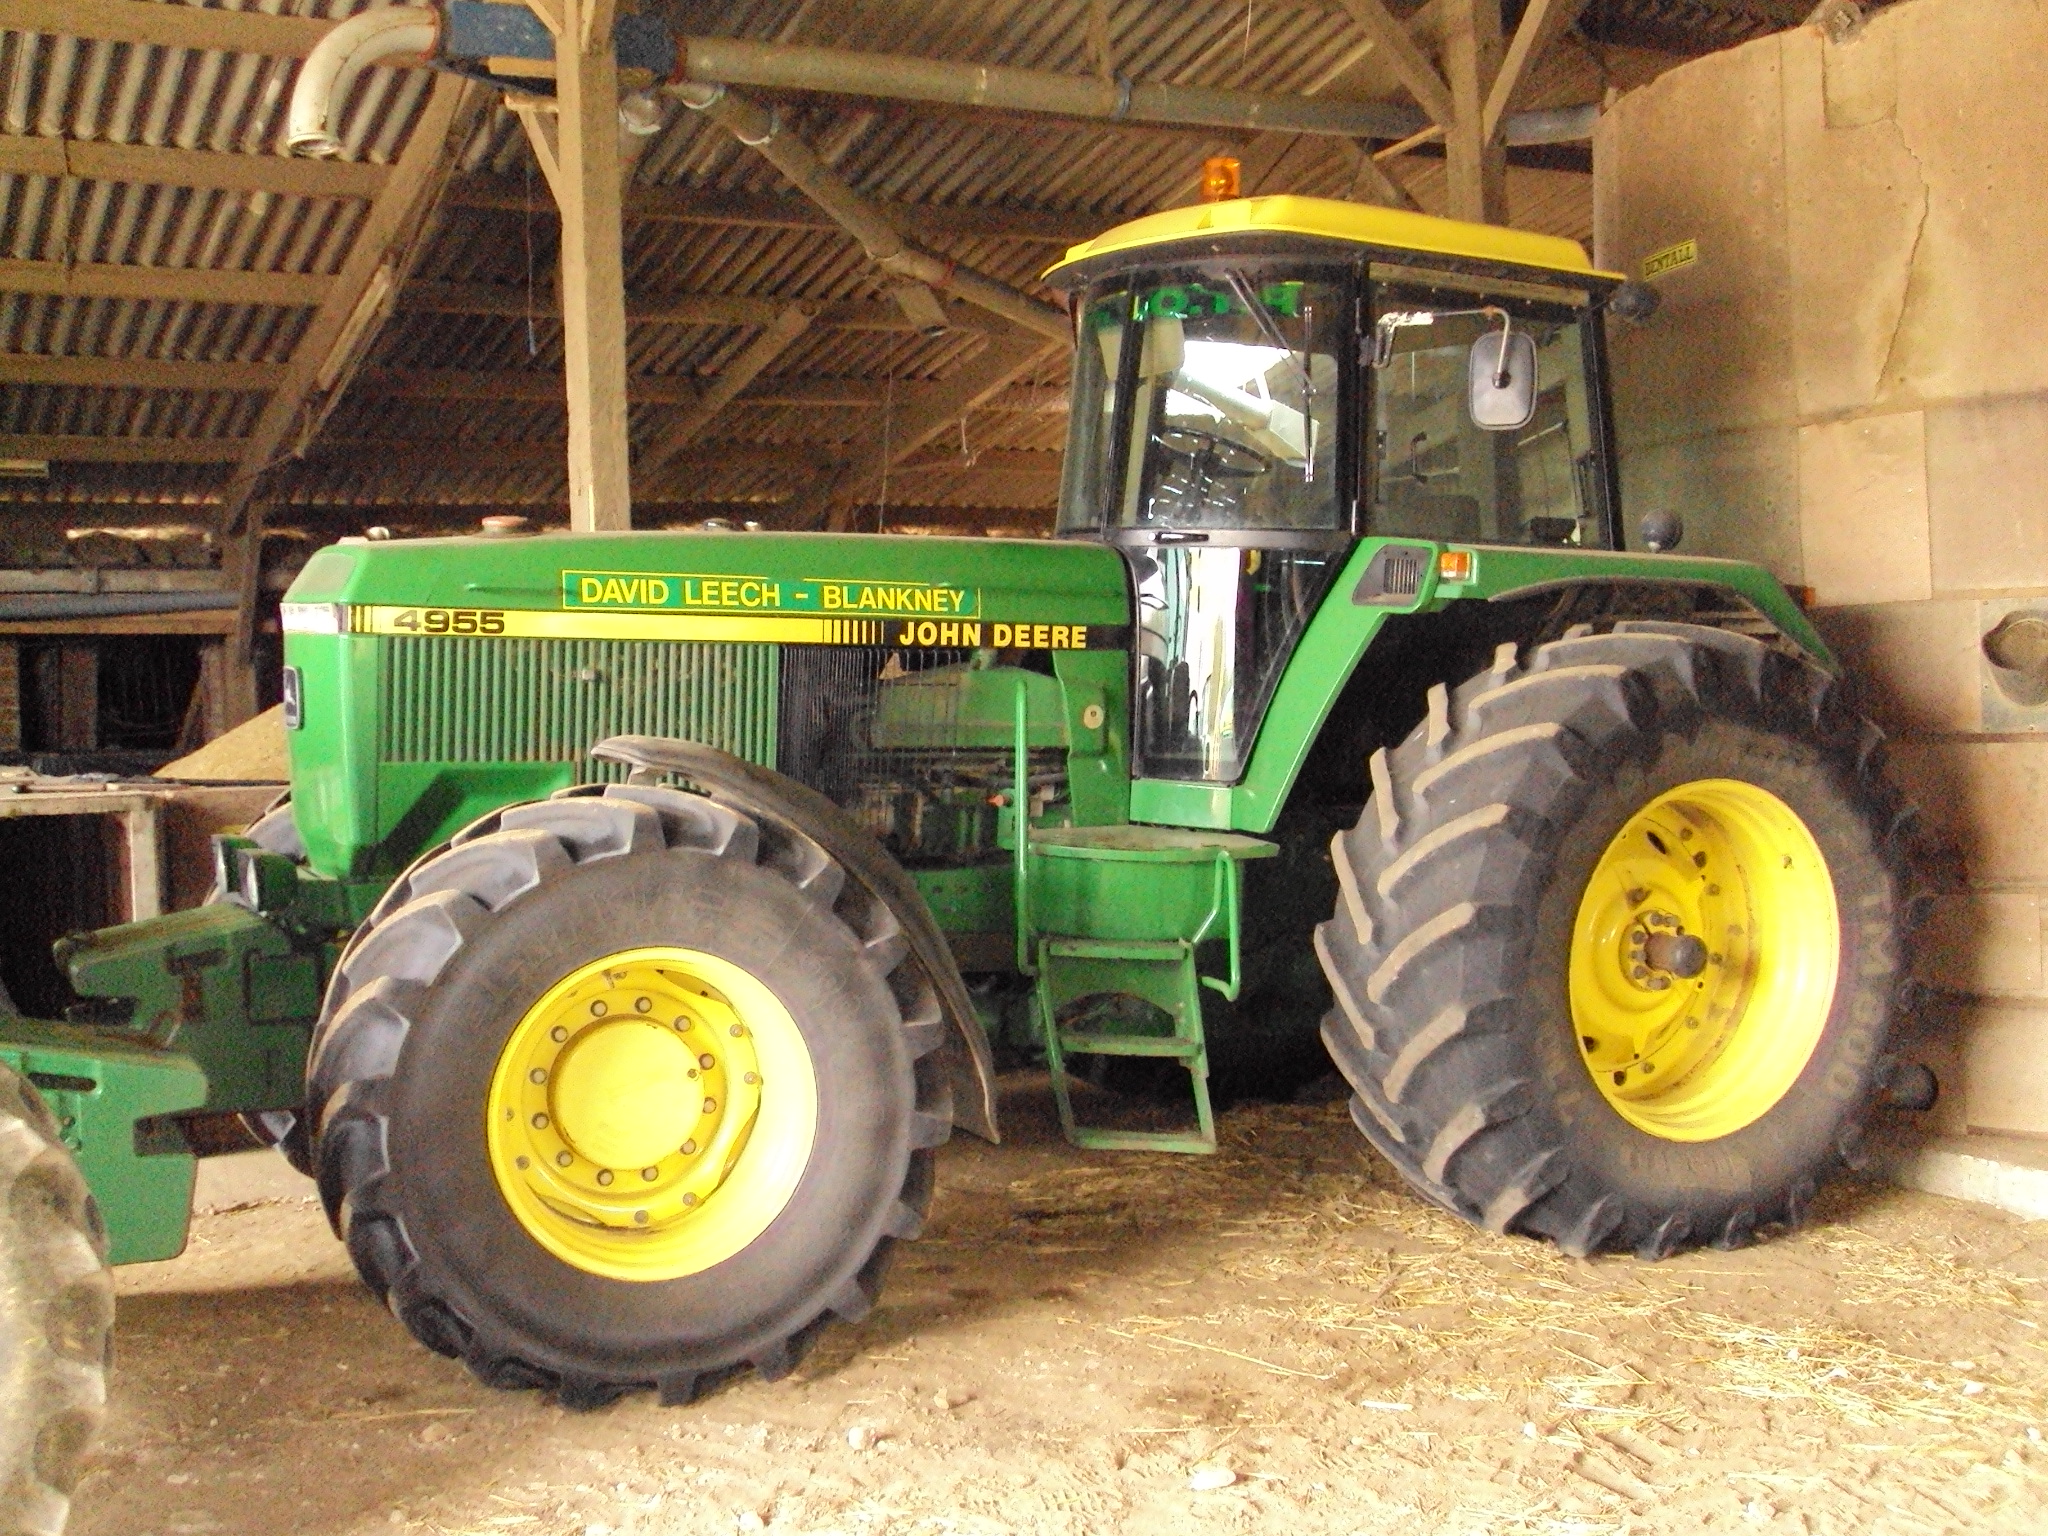 John Deere 4955 Tractor And Construction Plant Wiki The Classic Vehicle And Machinery Wiki 6449